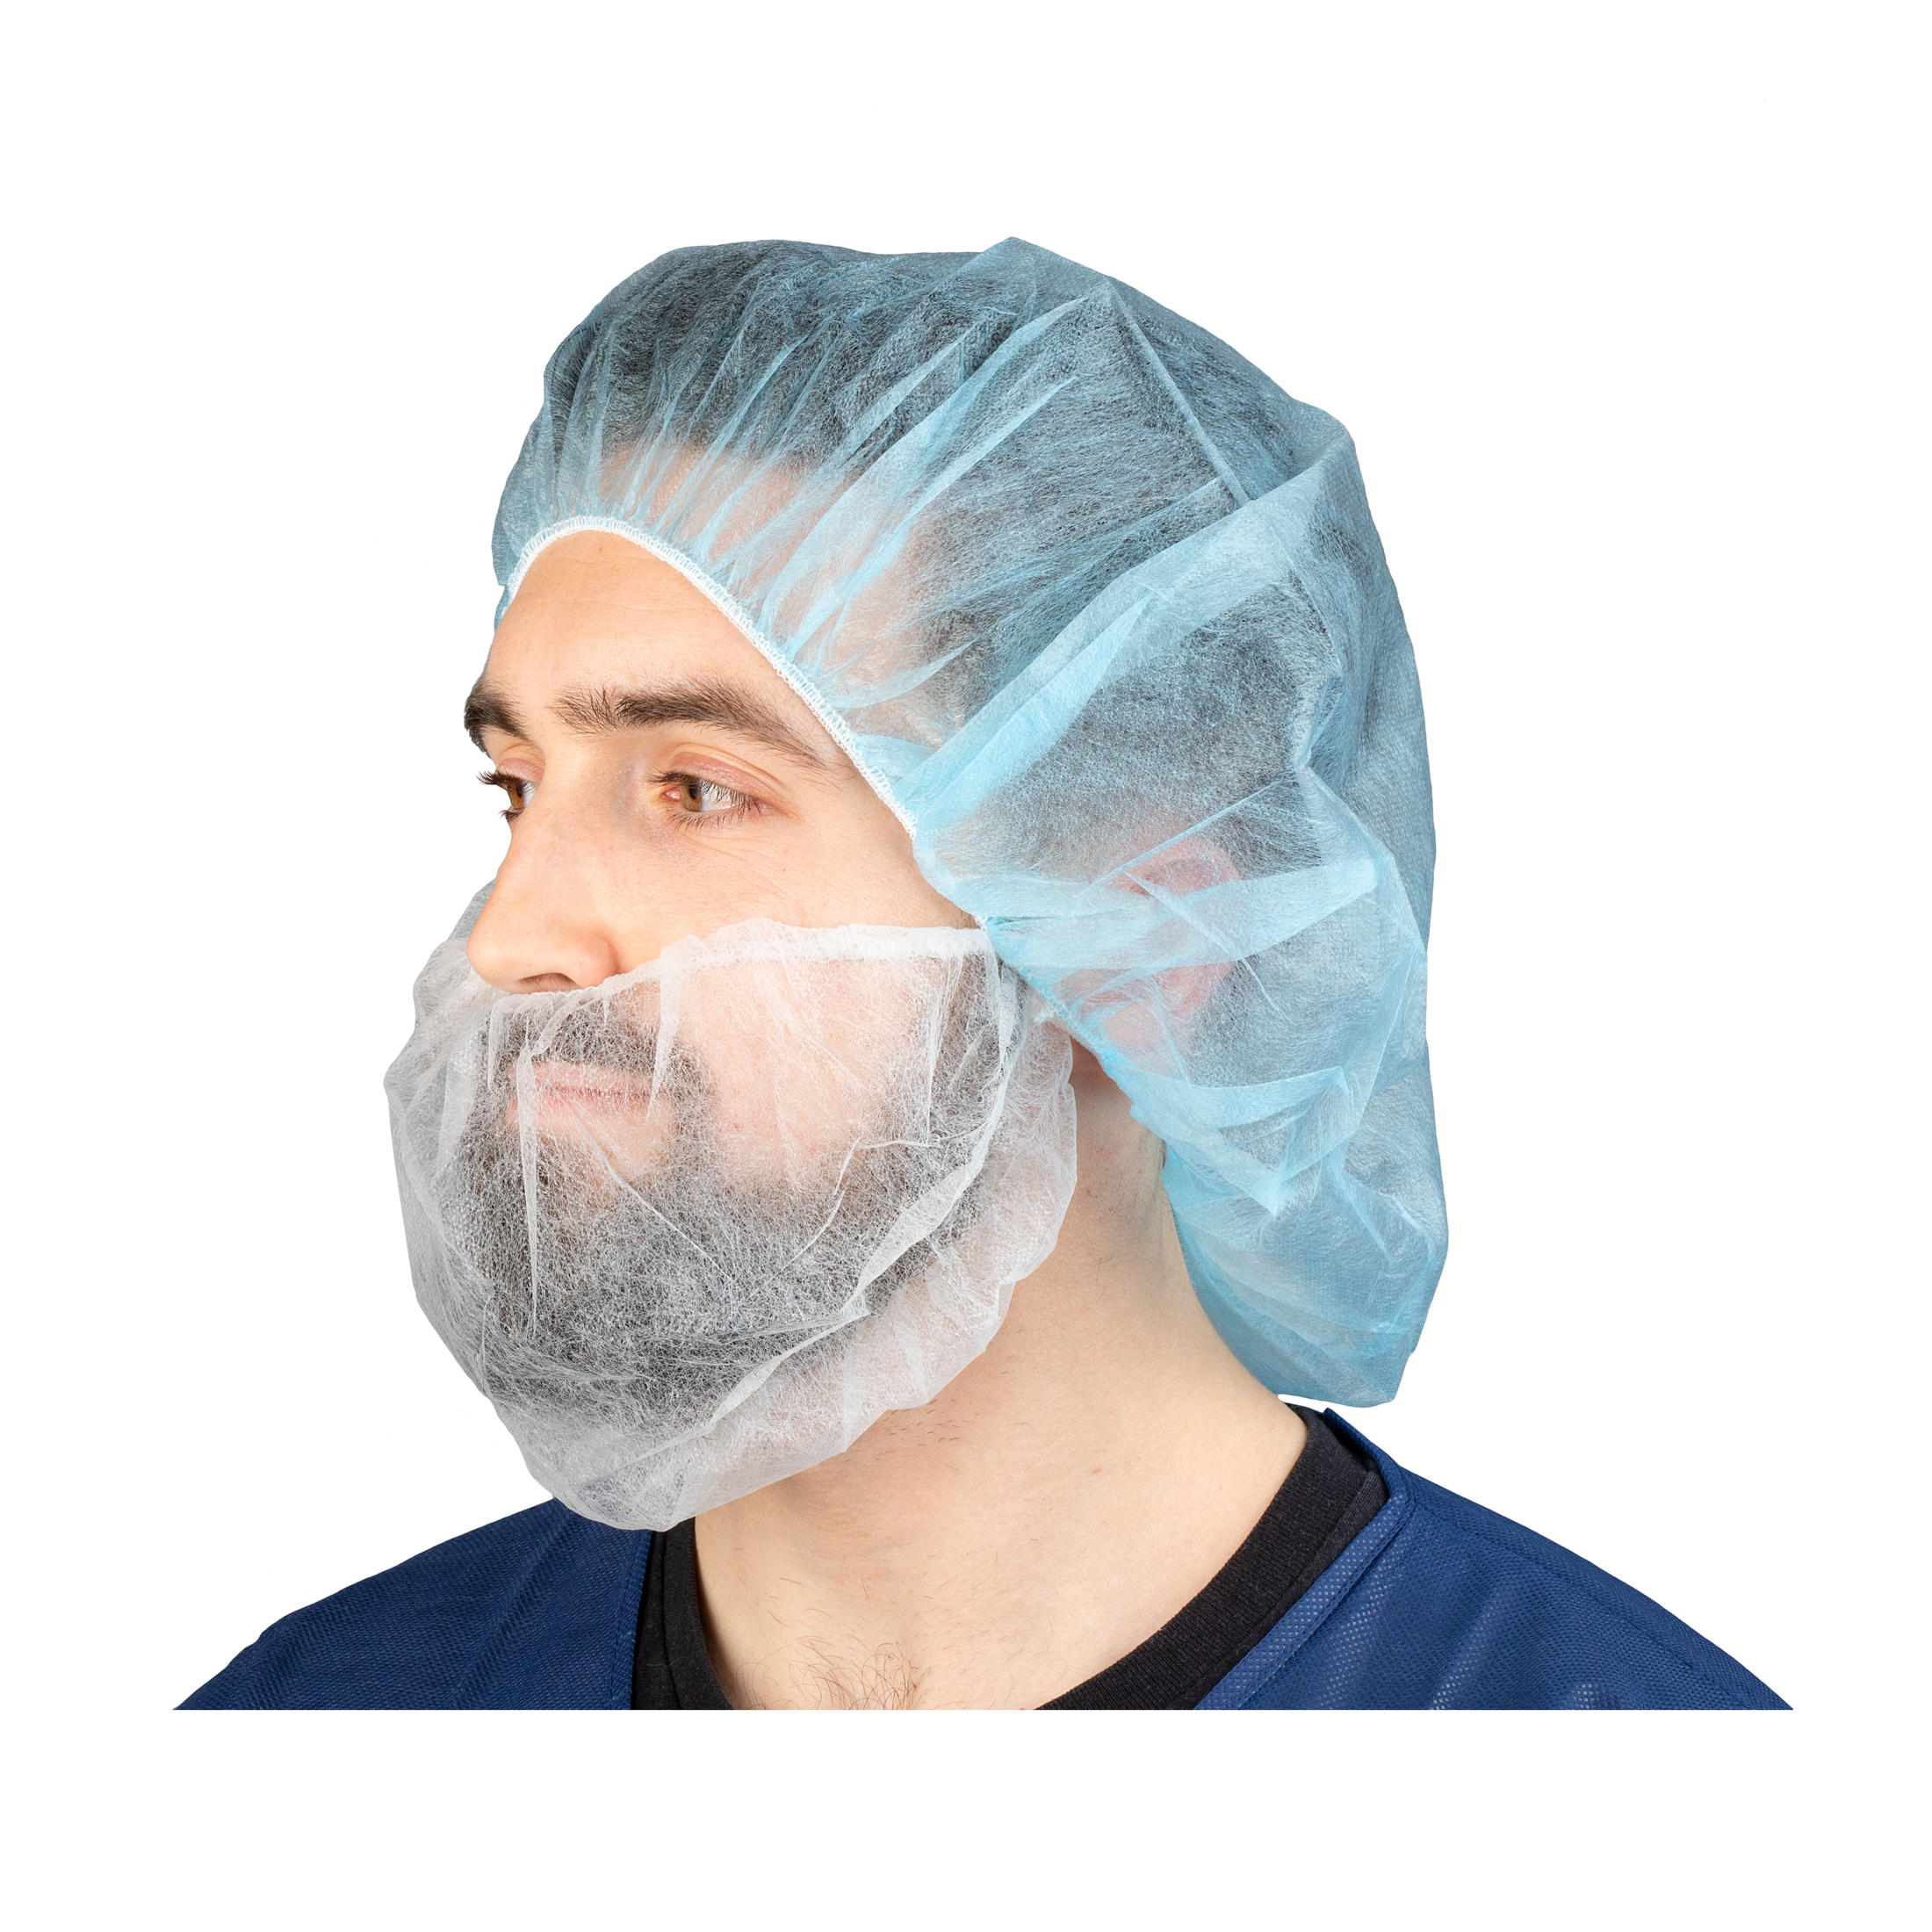 Face Coverings Products, Supplies and Equipment